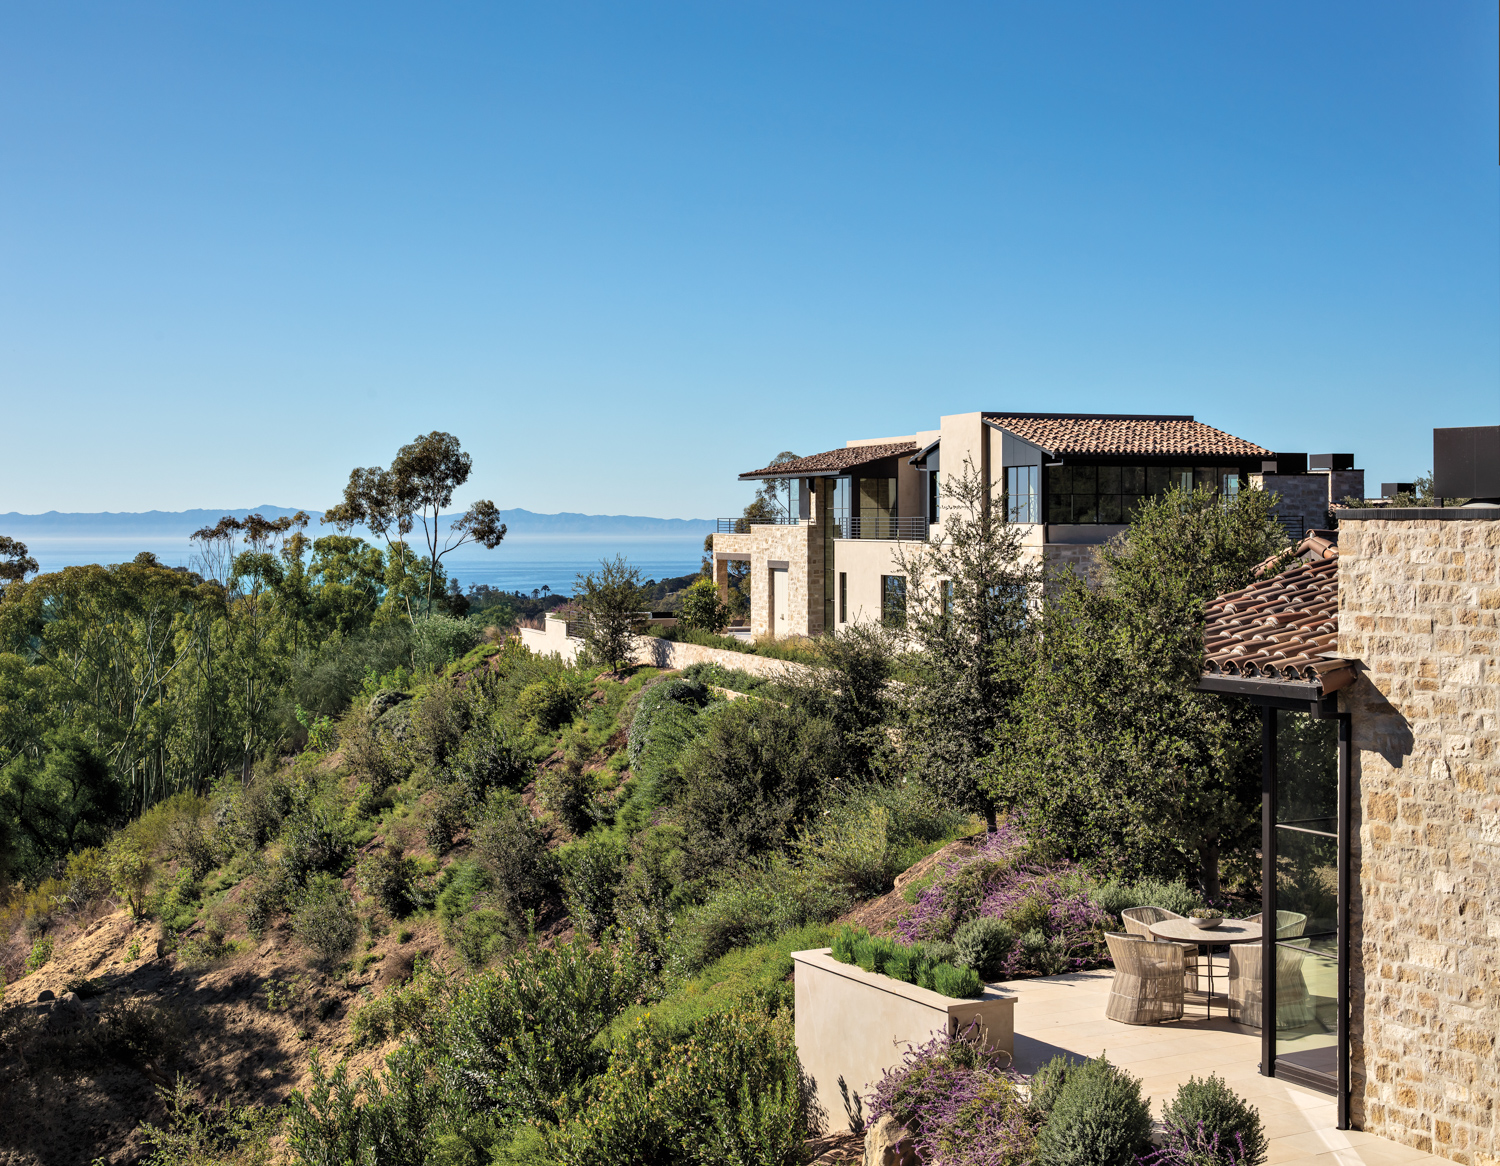 Visions Of European Hill Towns Come Alive On A Stunning Montecito Site